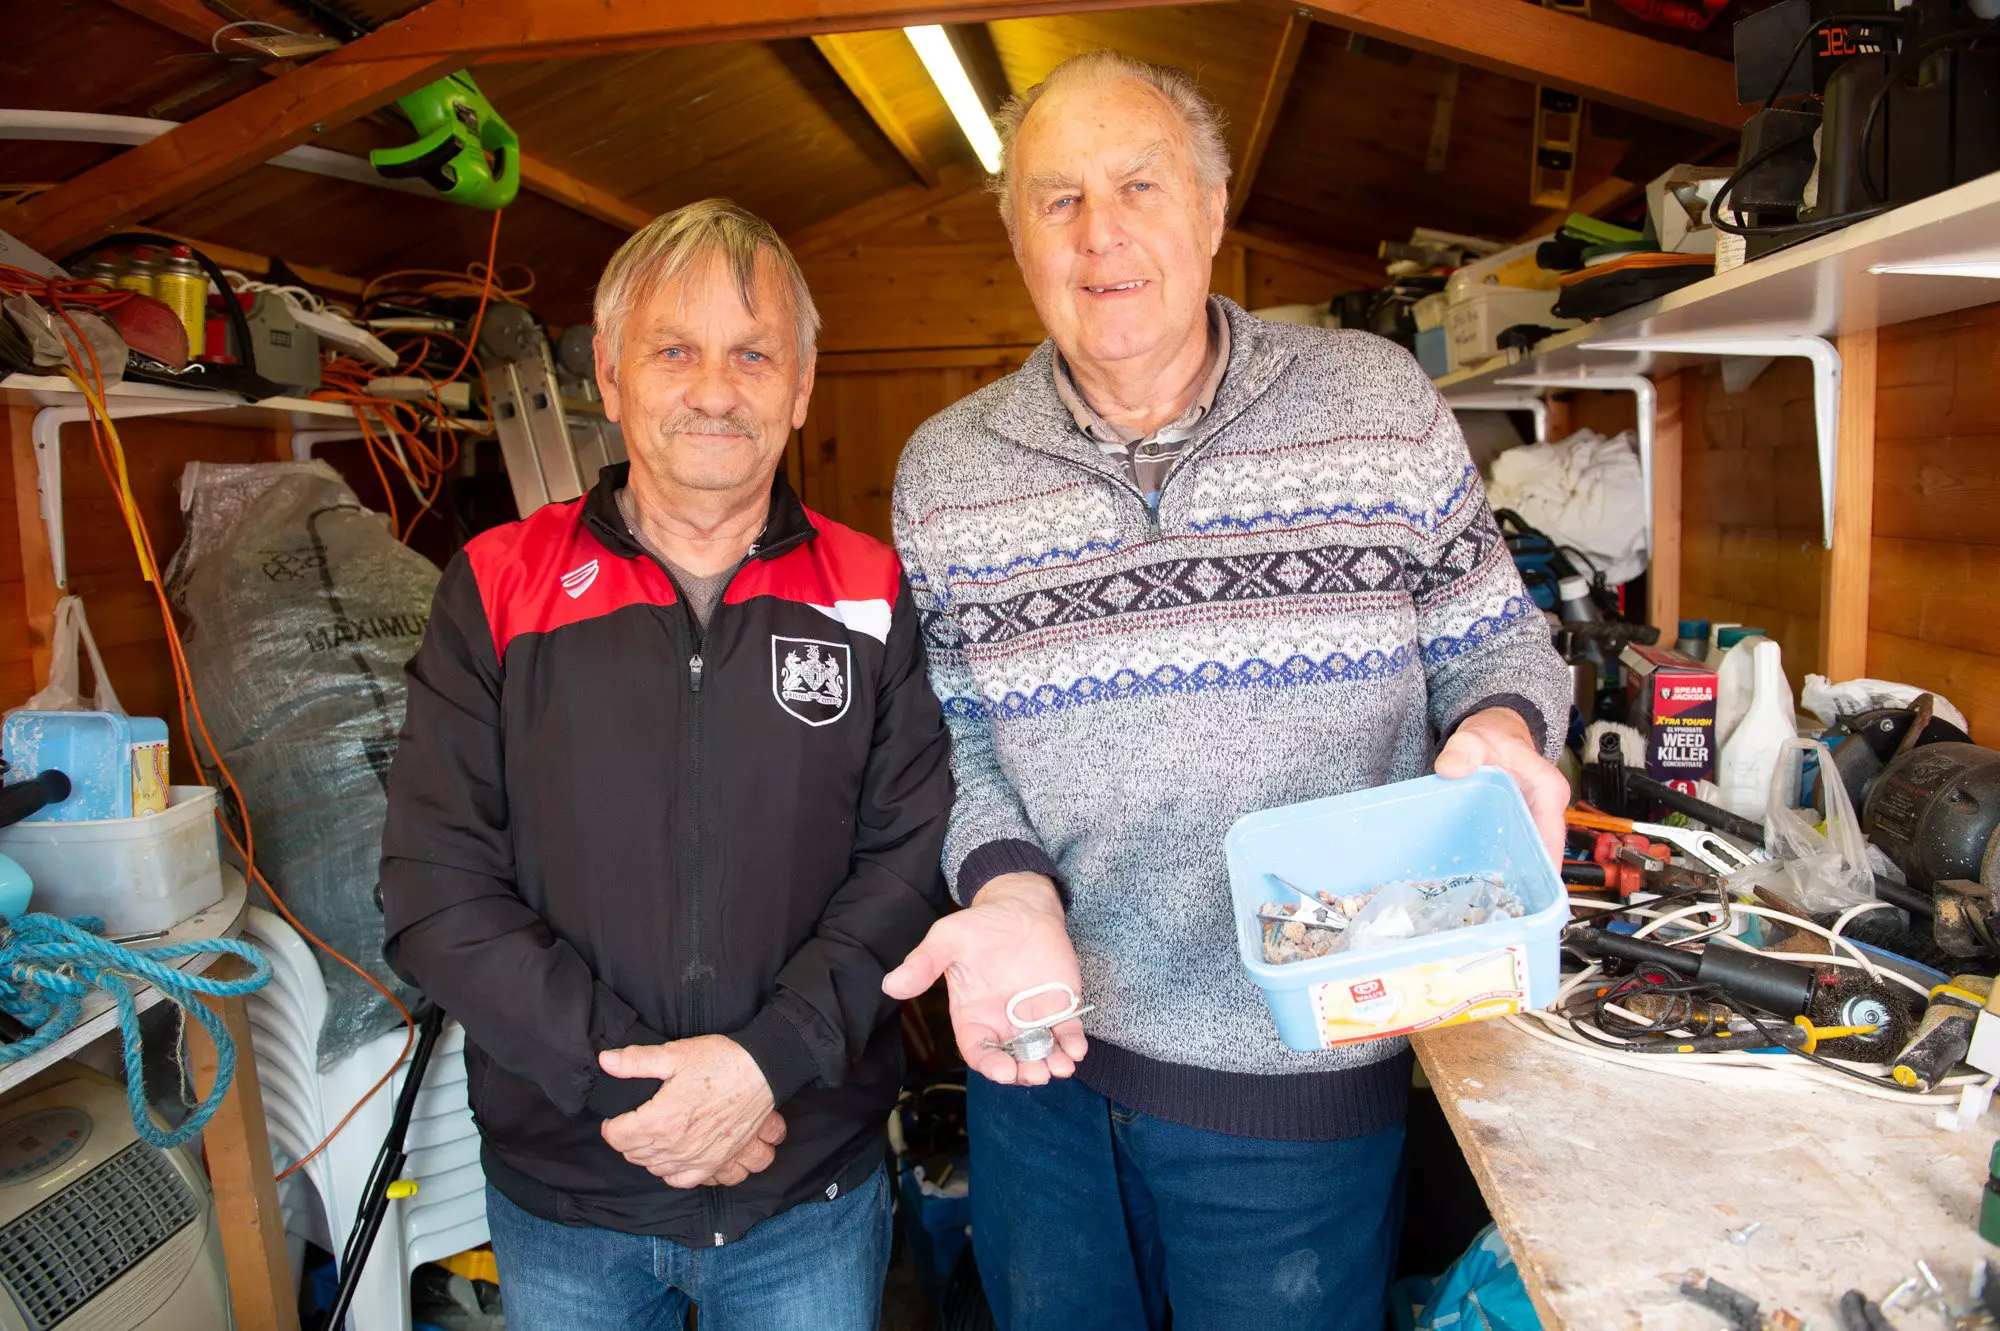 The two men were baffled when they found a mouse had been tidying the shed overnight.